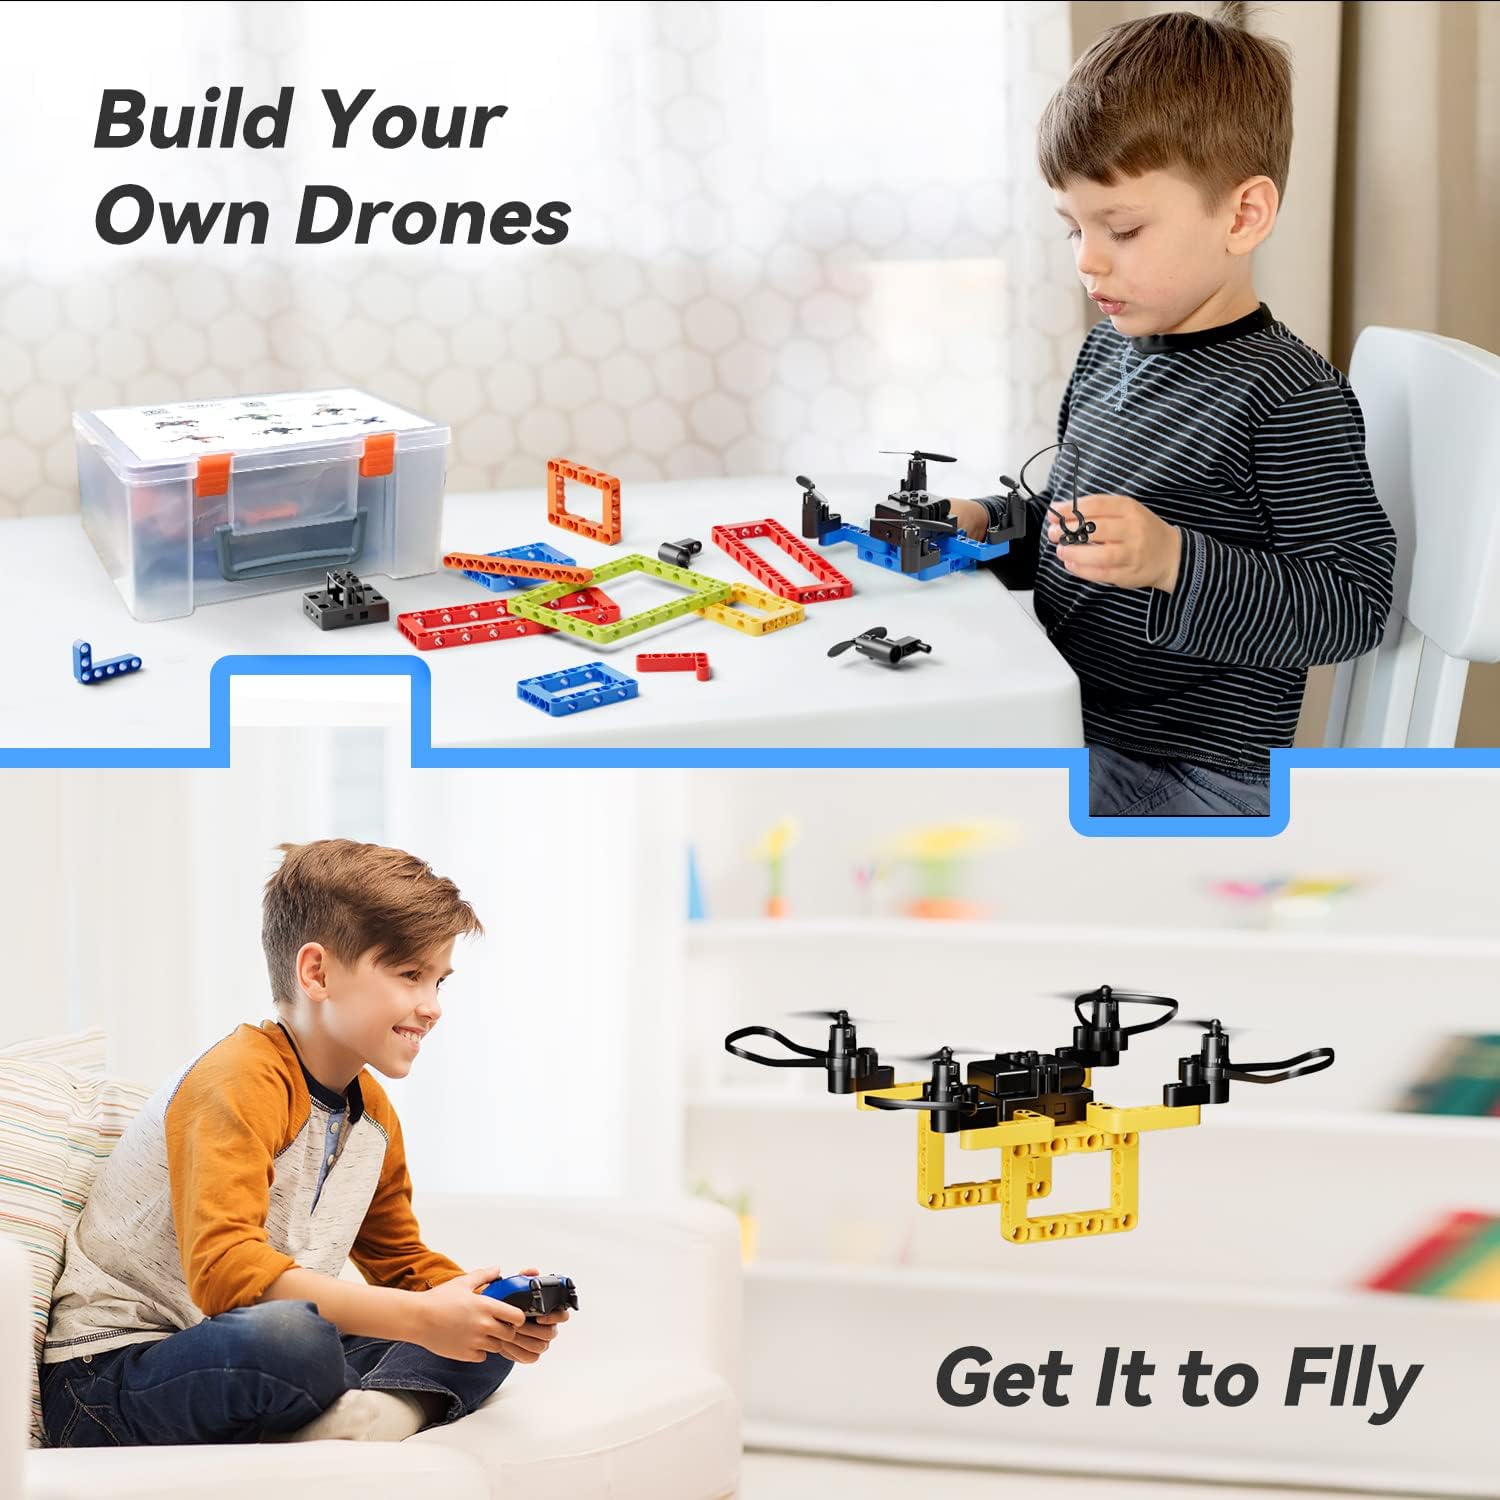 TECHVIO Drone for Kids, 5-IN-1 DIY Drone Building Kits, Mini Drone for Beginner with 3D Flips, Altitude Hold, Headless Mode,3 Speeds, Creative Educational Learning STEM Building Block Toy, Best Birthday Gifts for Boys Girls & Children